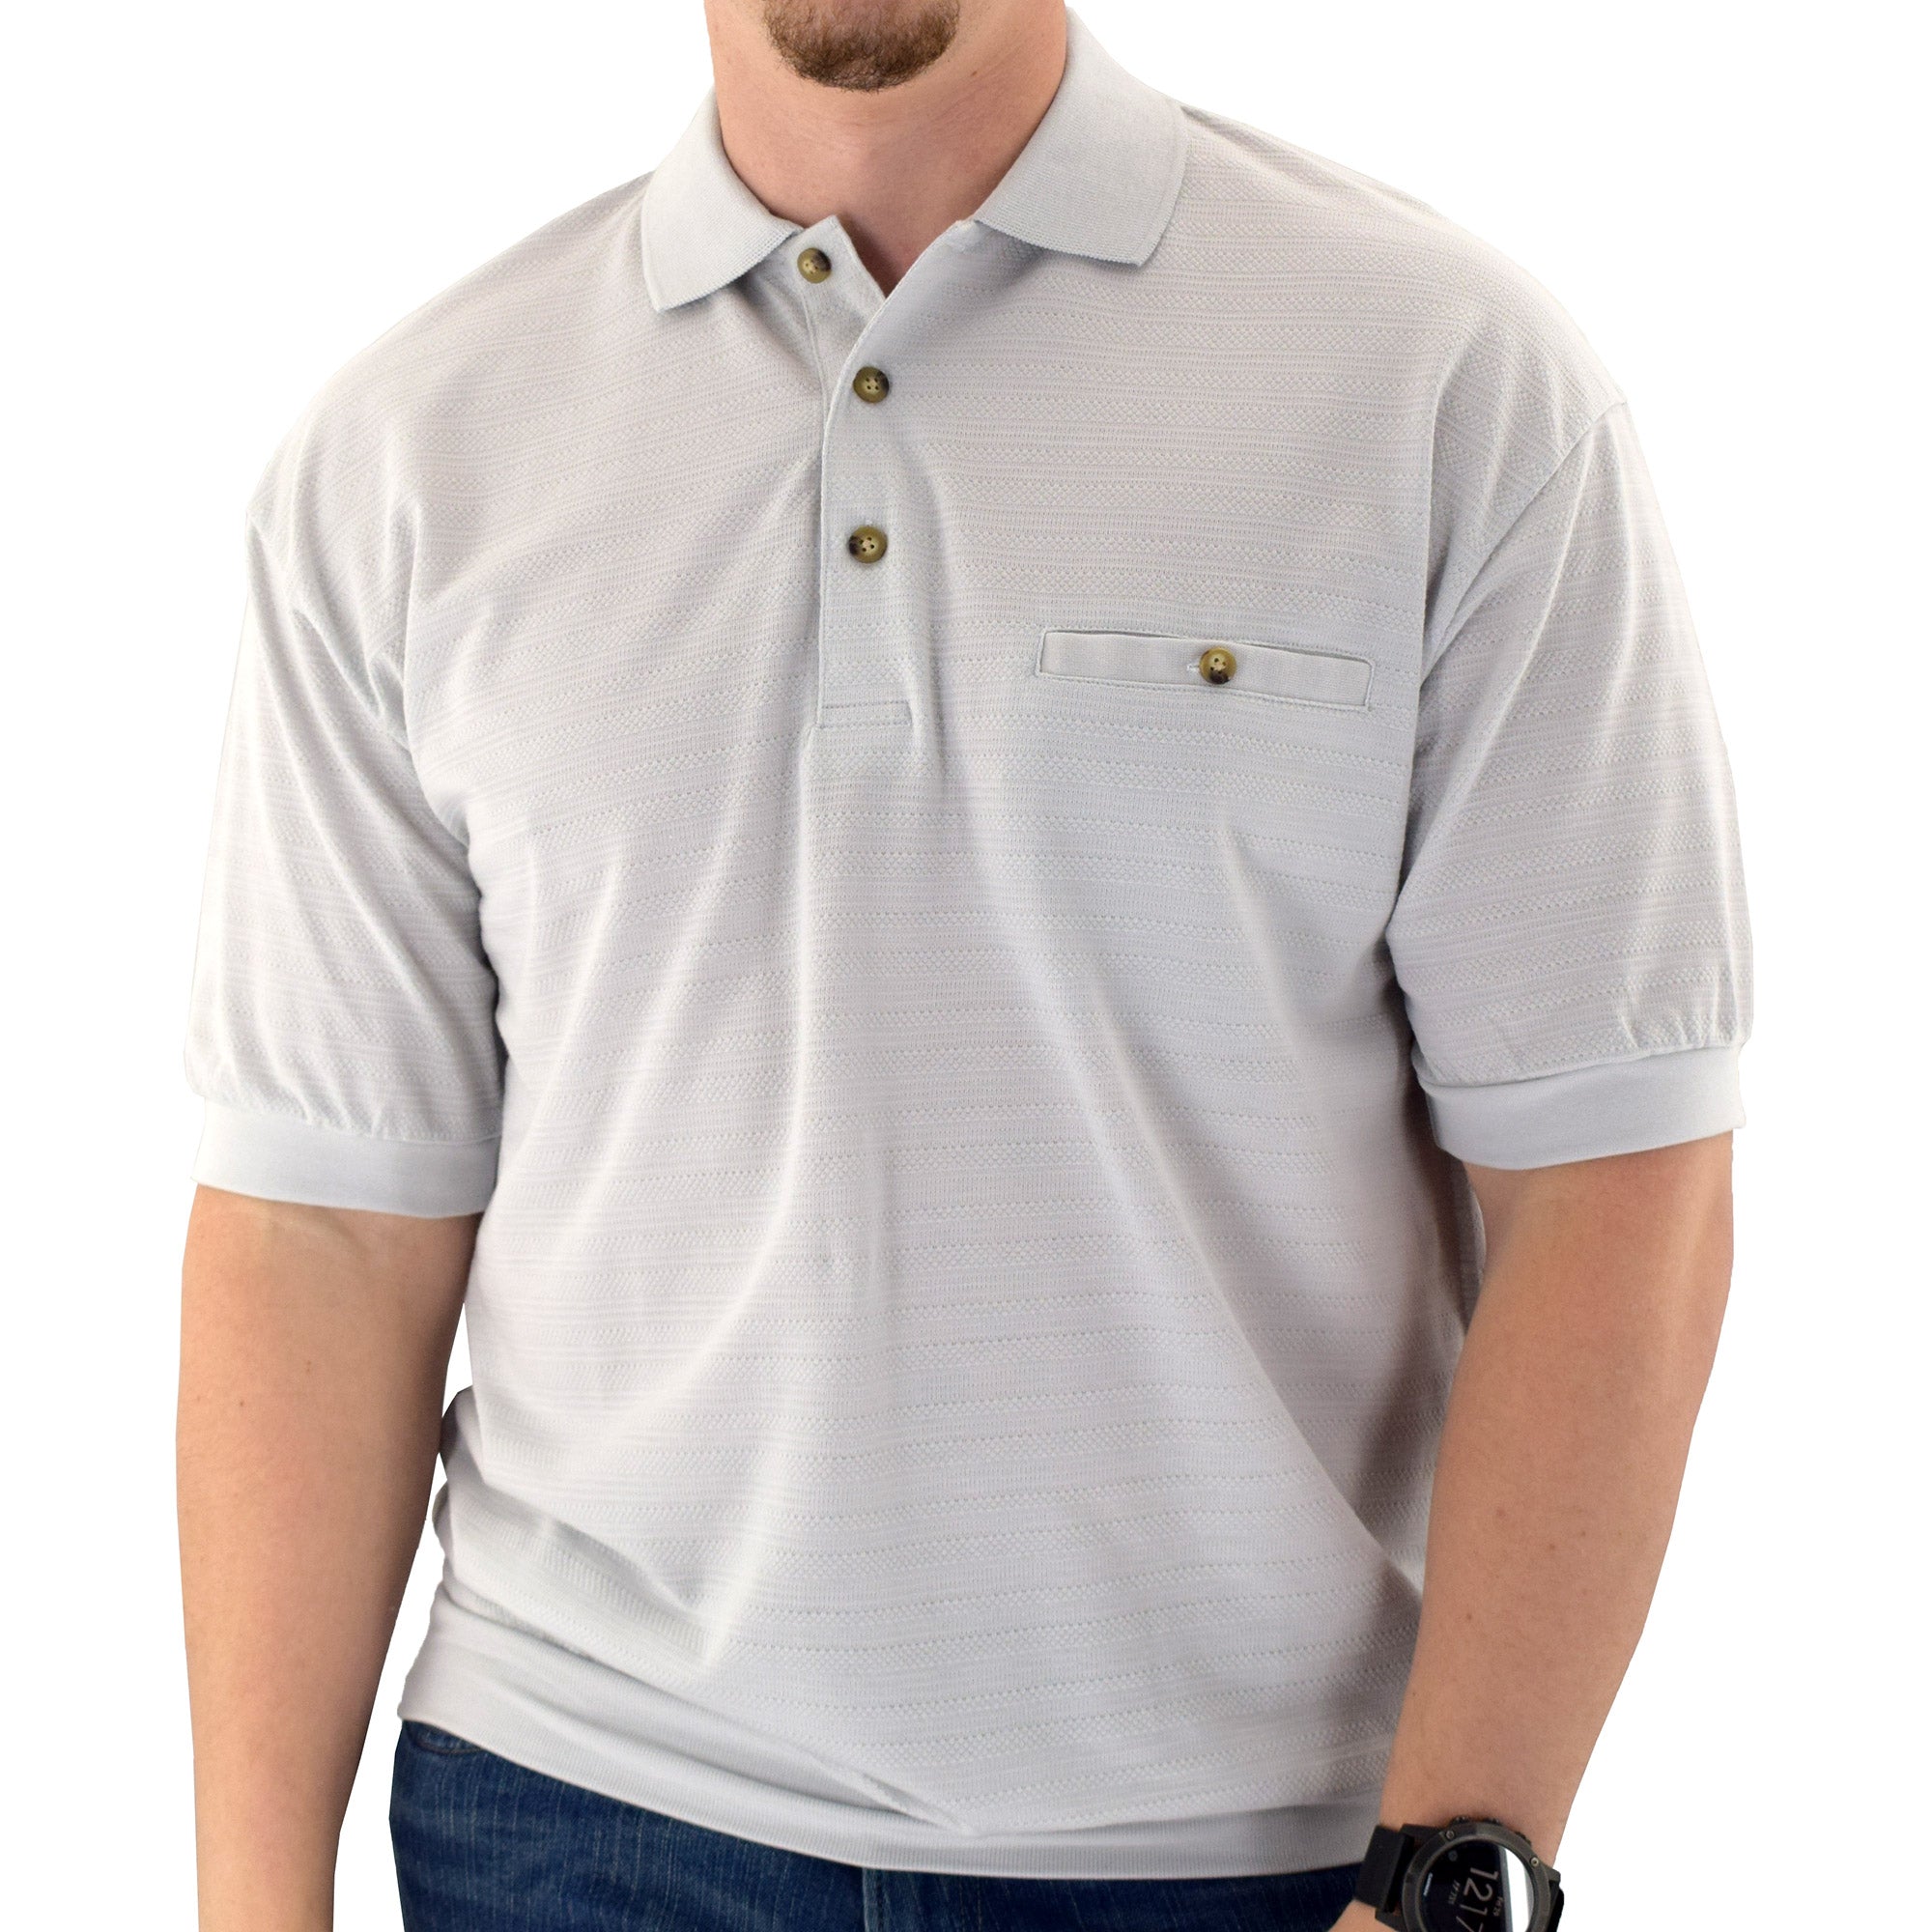 This Safe Harbor Solid Pique Banded Bottom Shirt is made of 60% Cotton and  40% Polyester. One left chest pocket. – bandedbottom